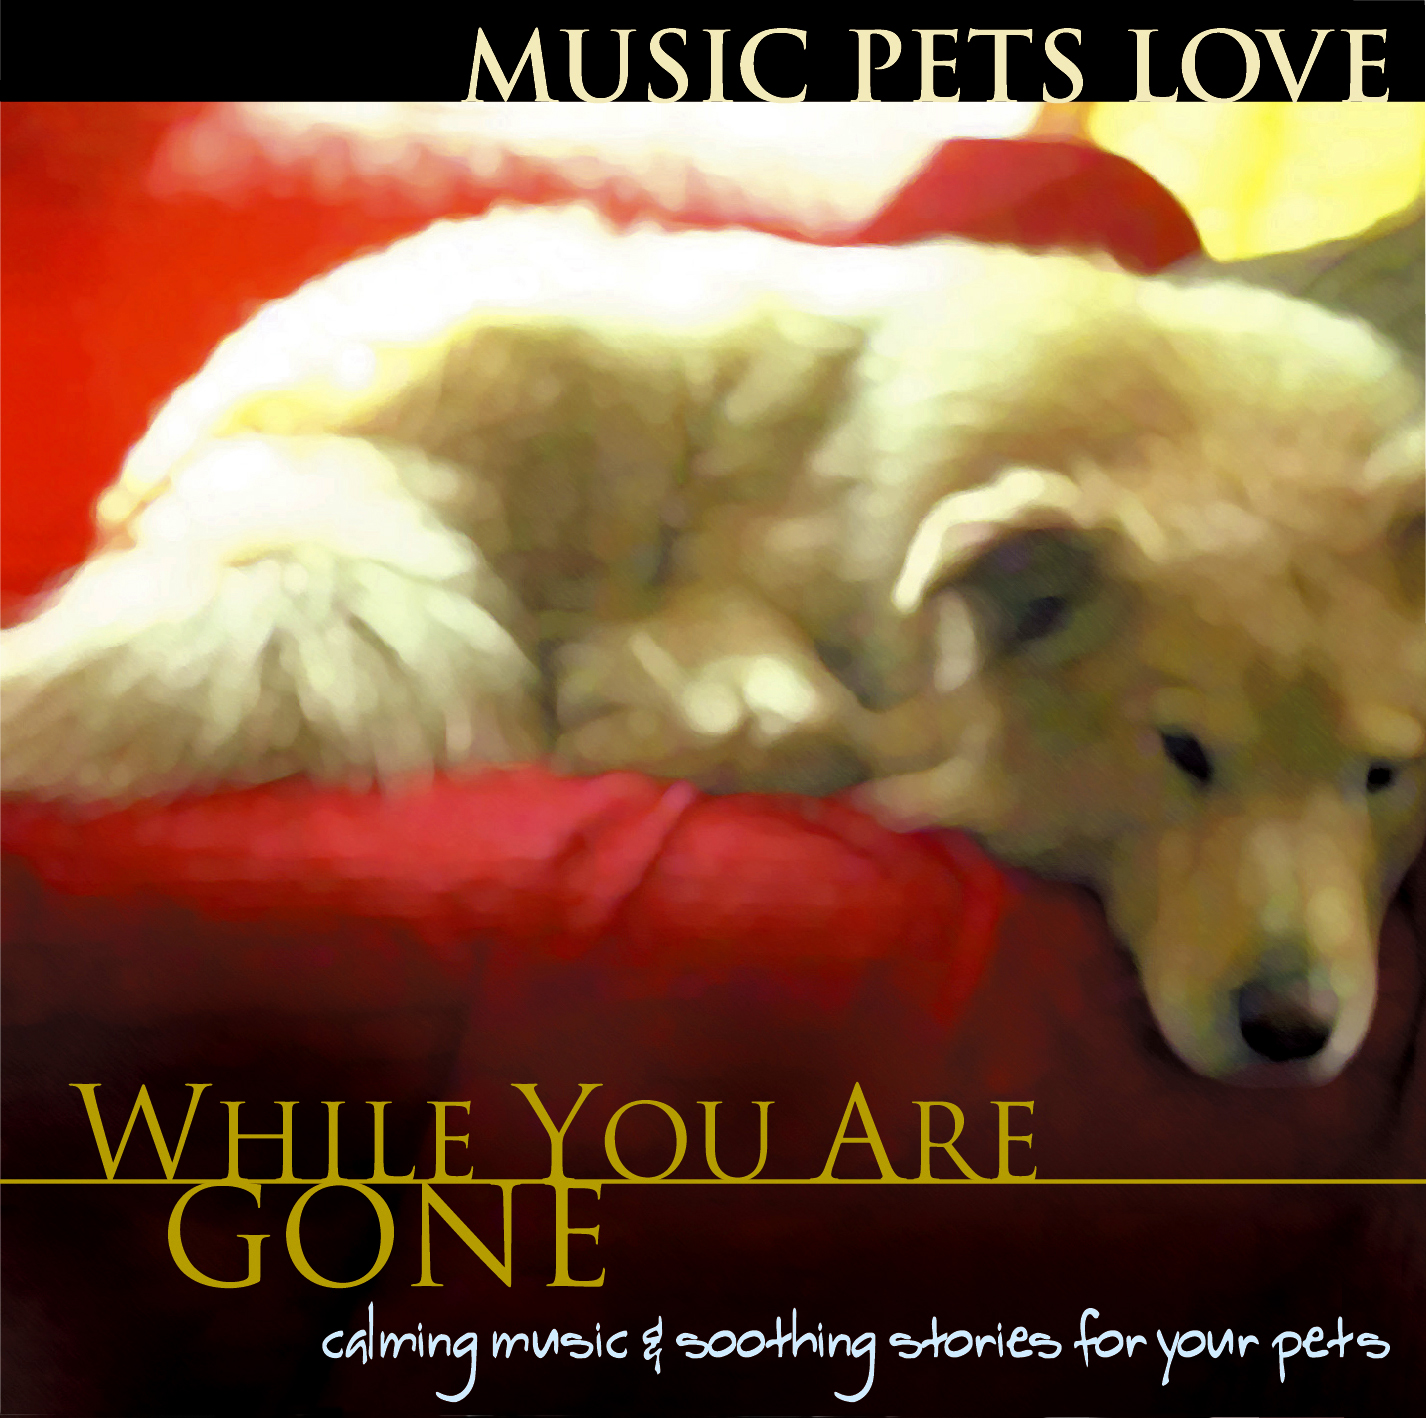 Music Pets Love: While You Are Gone